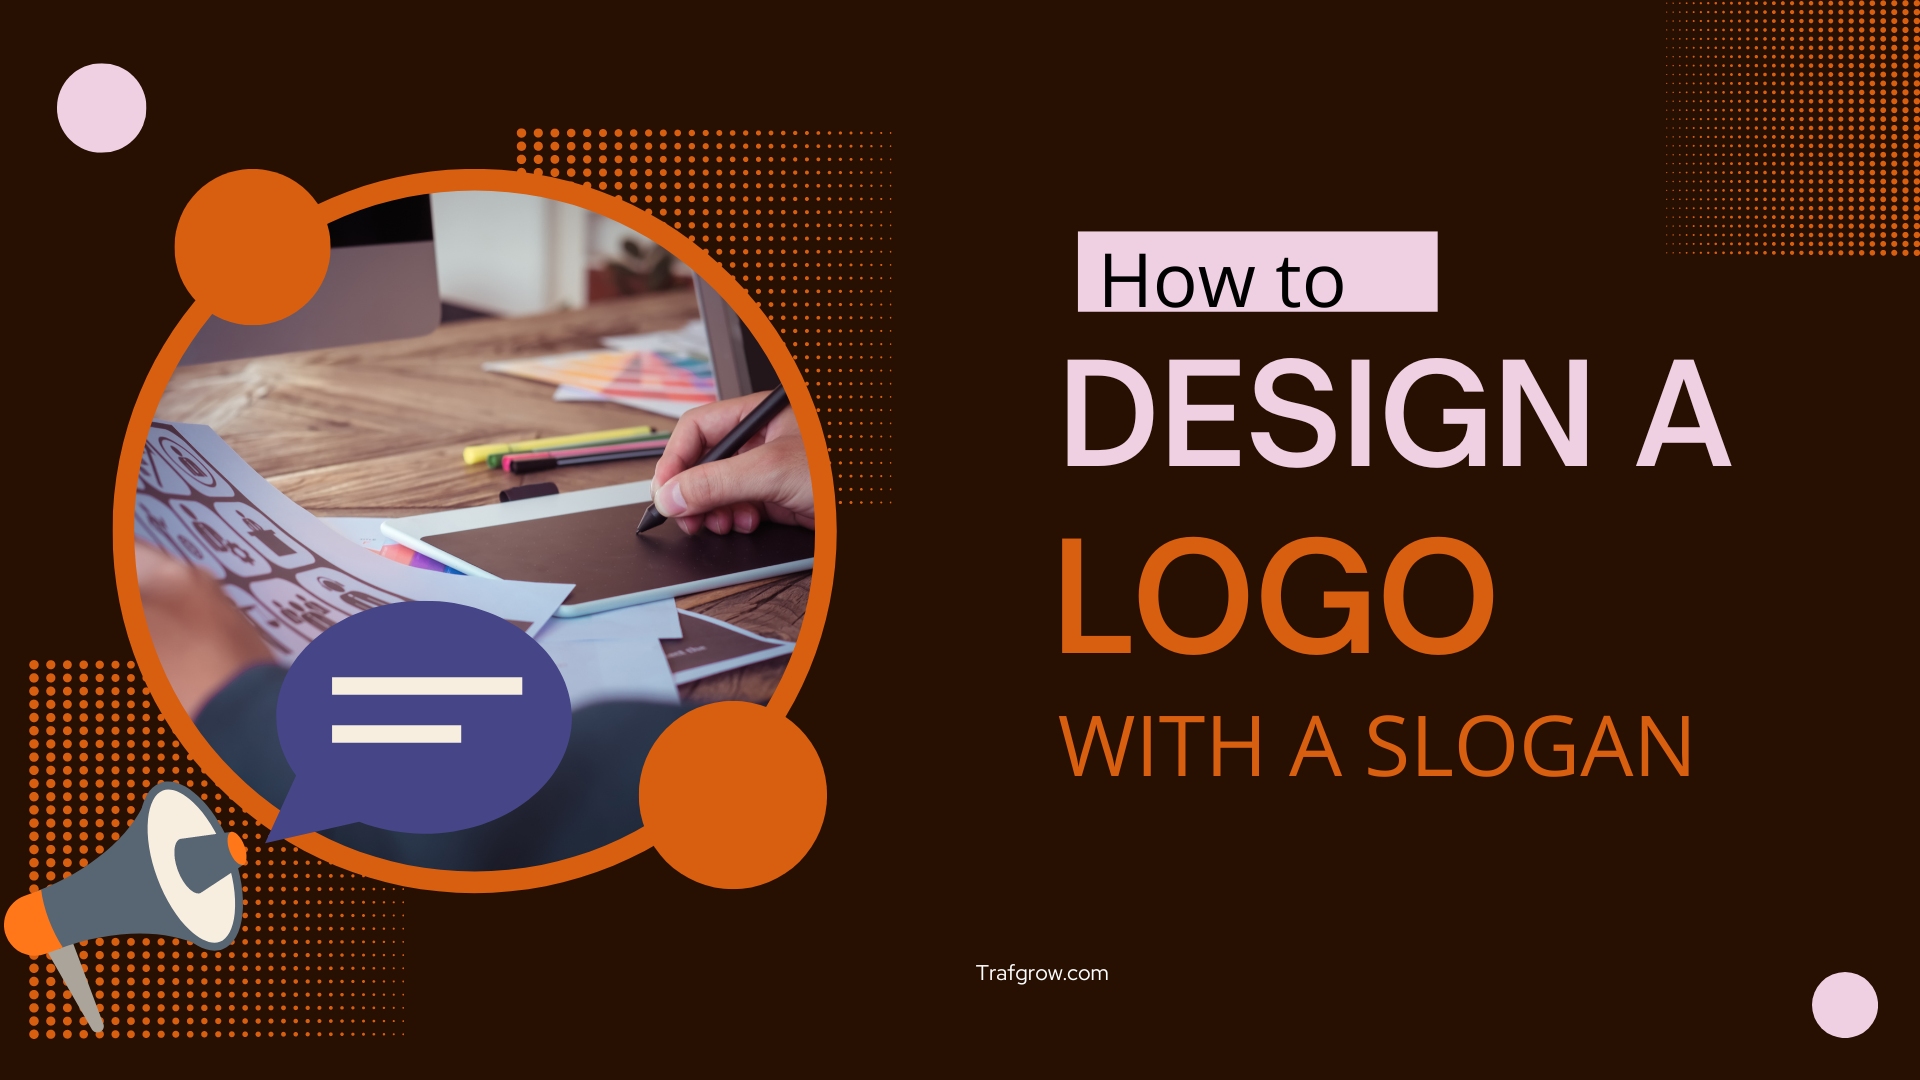 Creating a Logo with Slogan: A Step-by-Step Guide